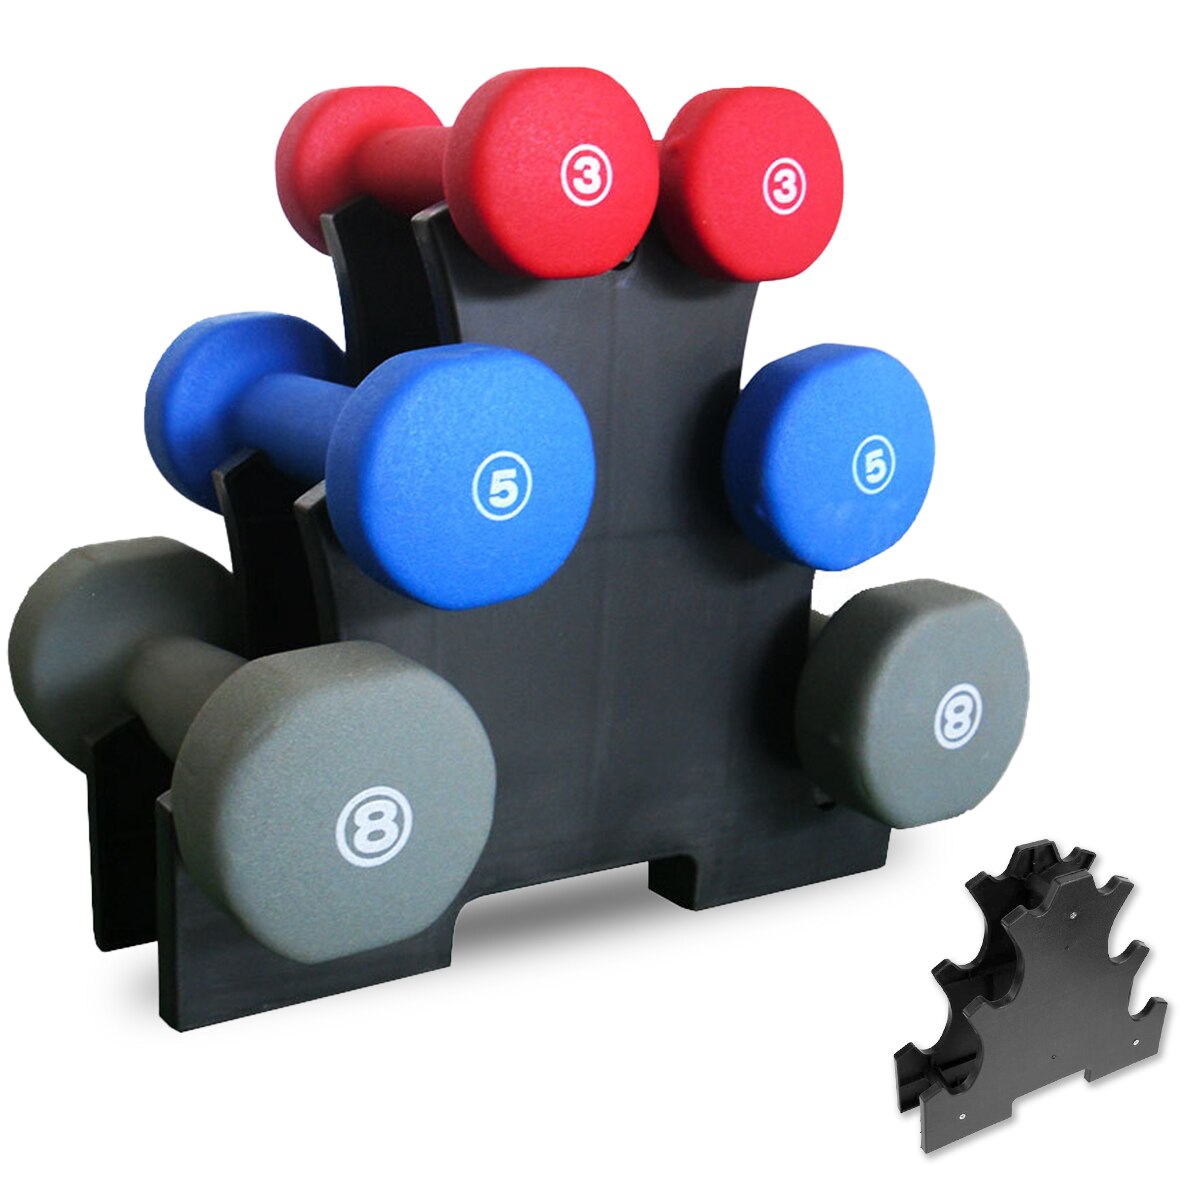 Dumbbell Storage Rack Stand 3-layer Hand-held Dumbbell Storage Rack For Home Office Gym Sport Exercise Accessories: Black